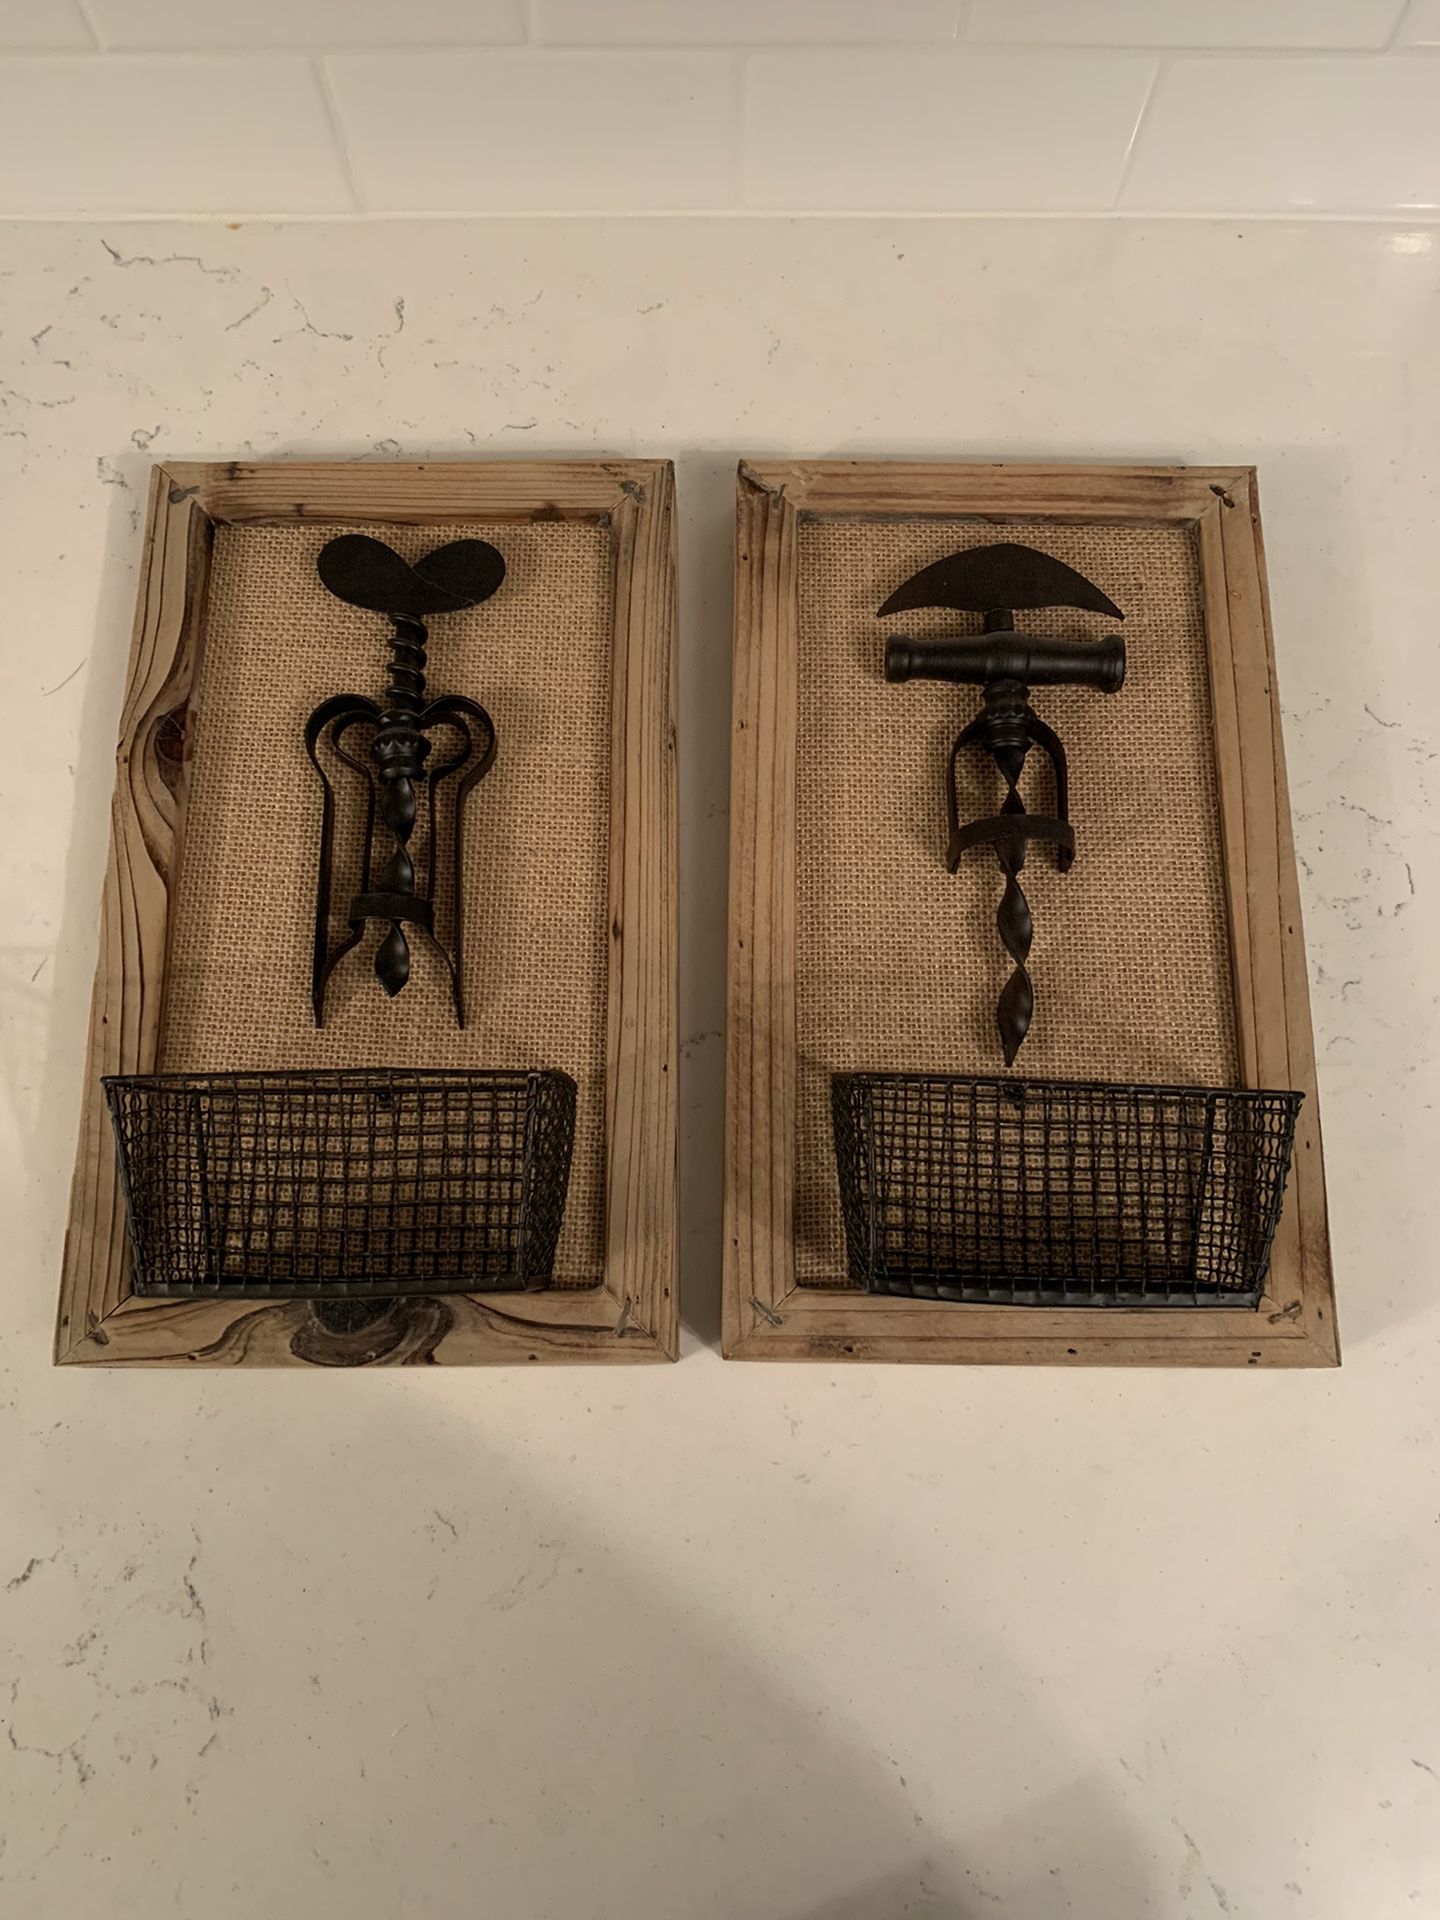 Set of wine opener art pieces with baskets for corks